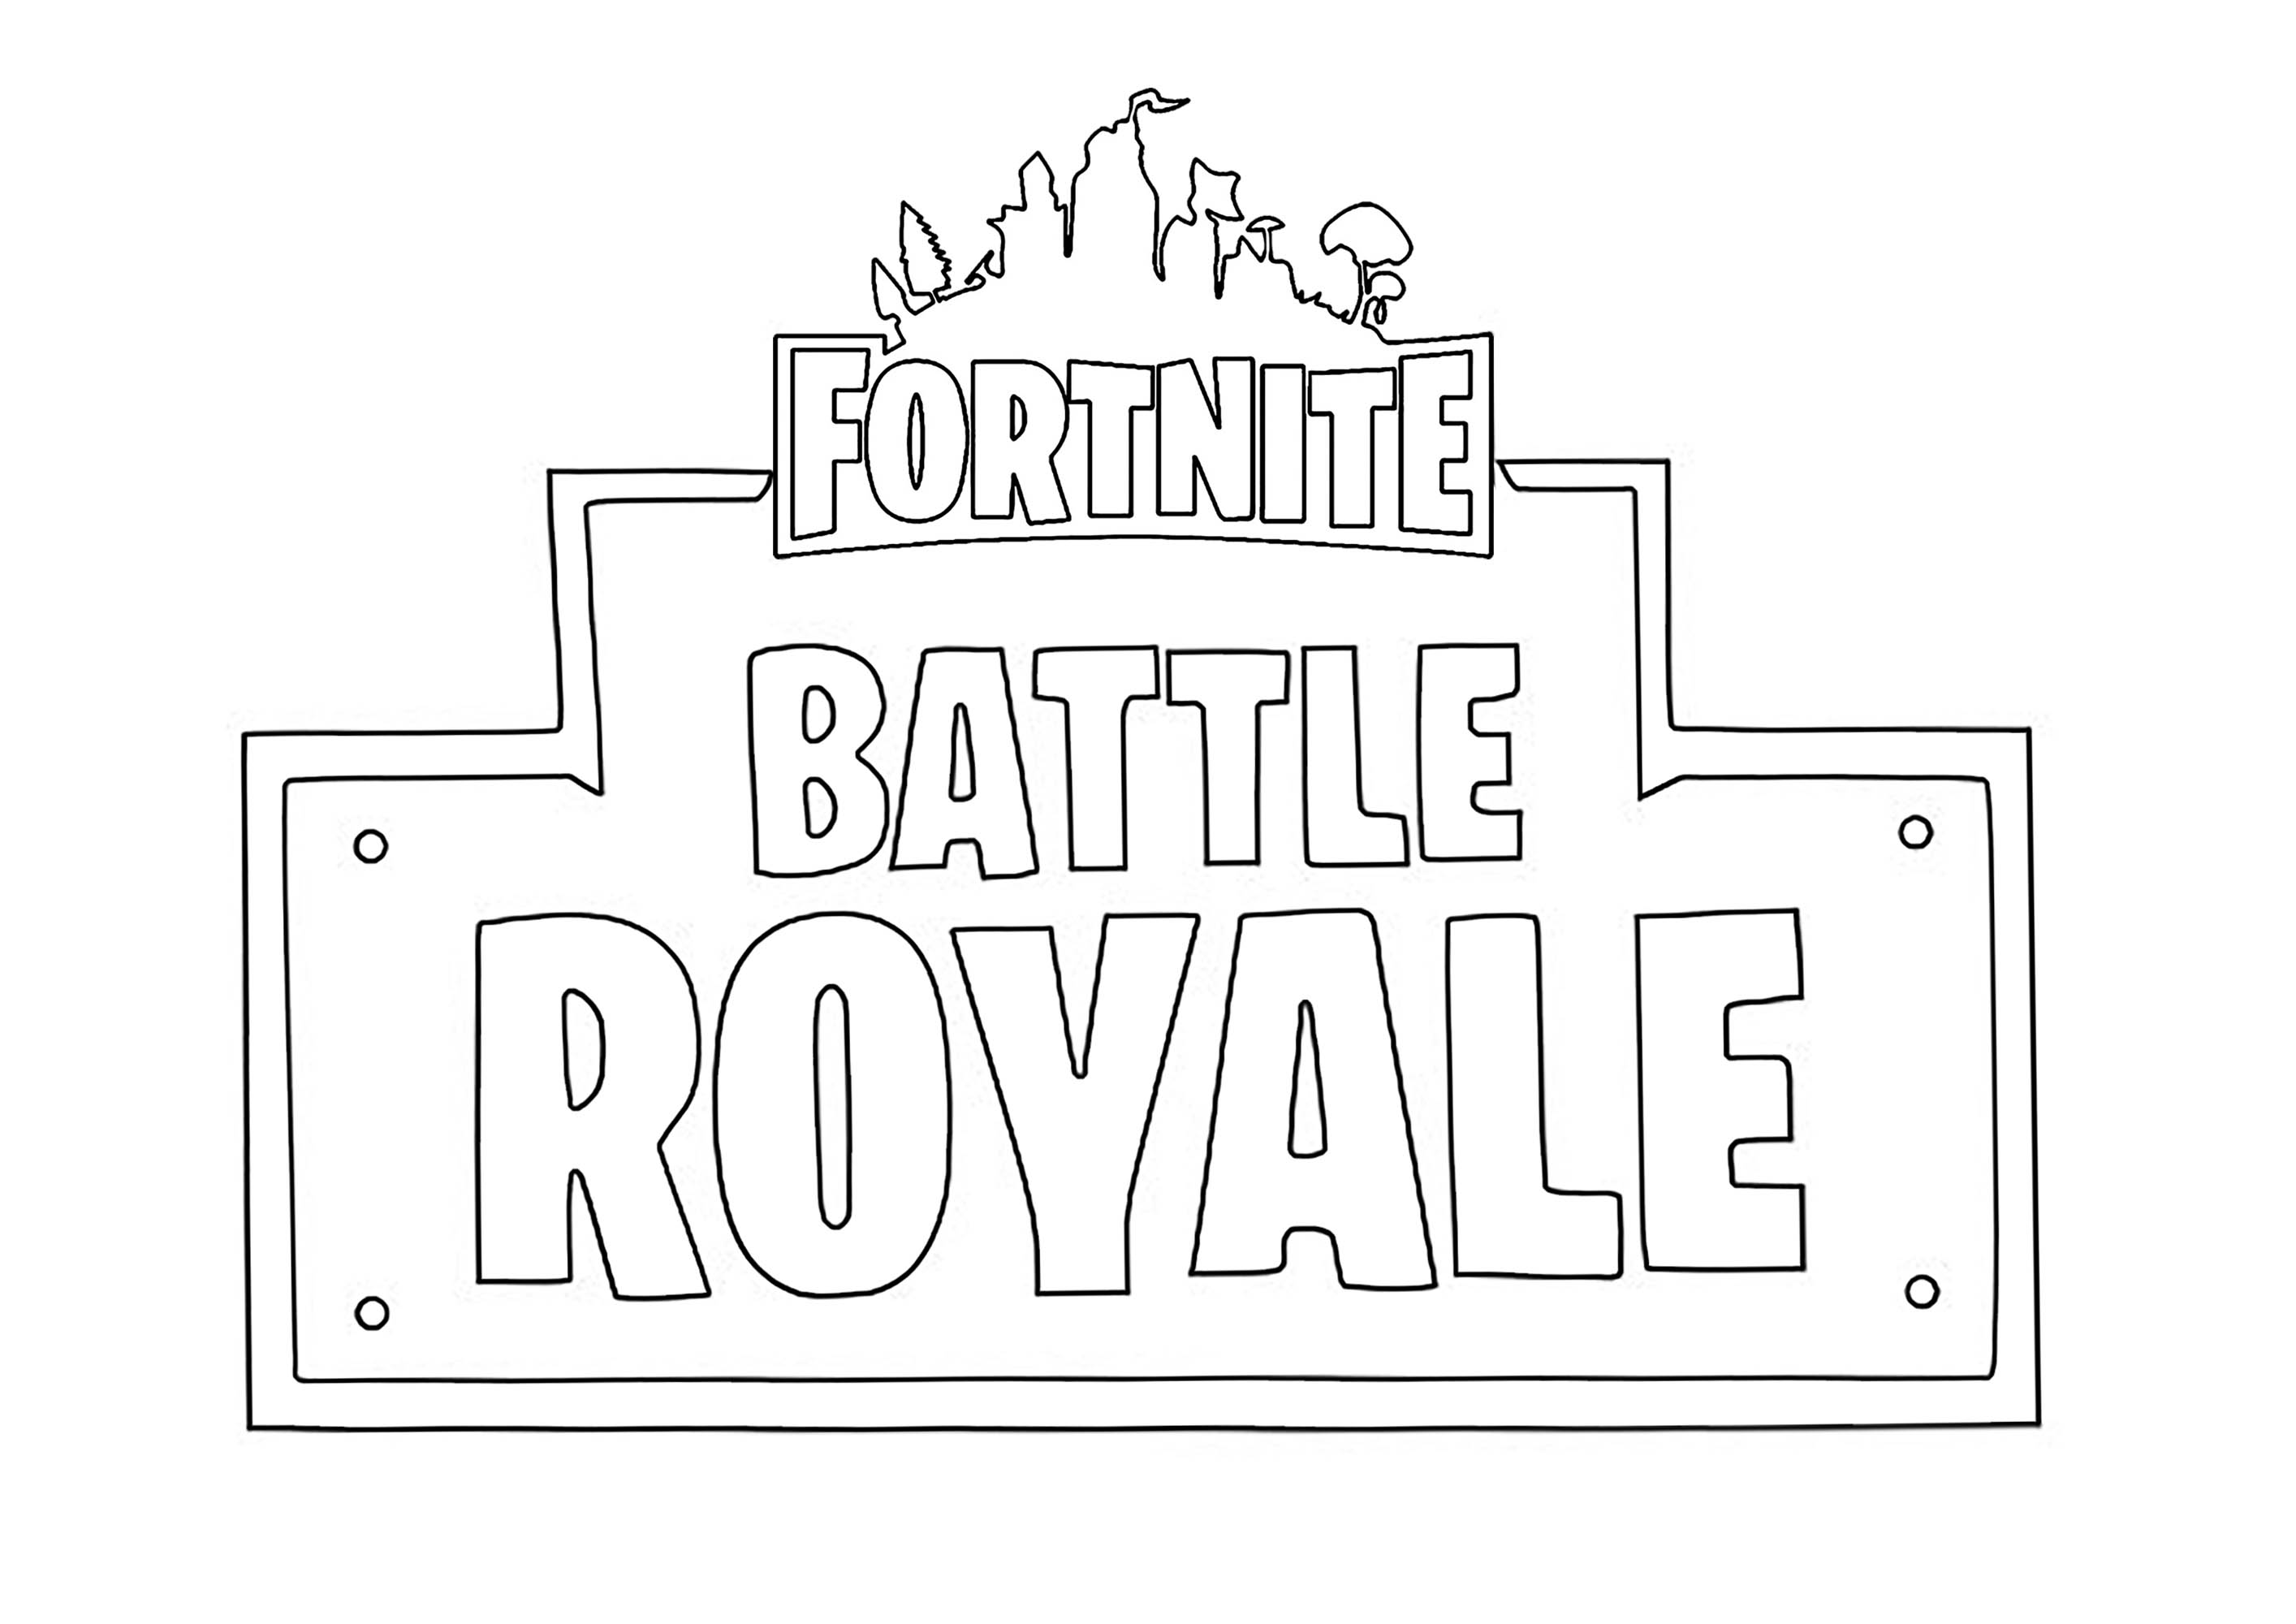 Scar Coloring Page Fortnite | Coloringsite.co - 2828 x 2000 jpeg 182kB